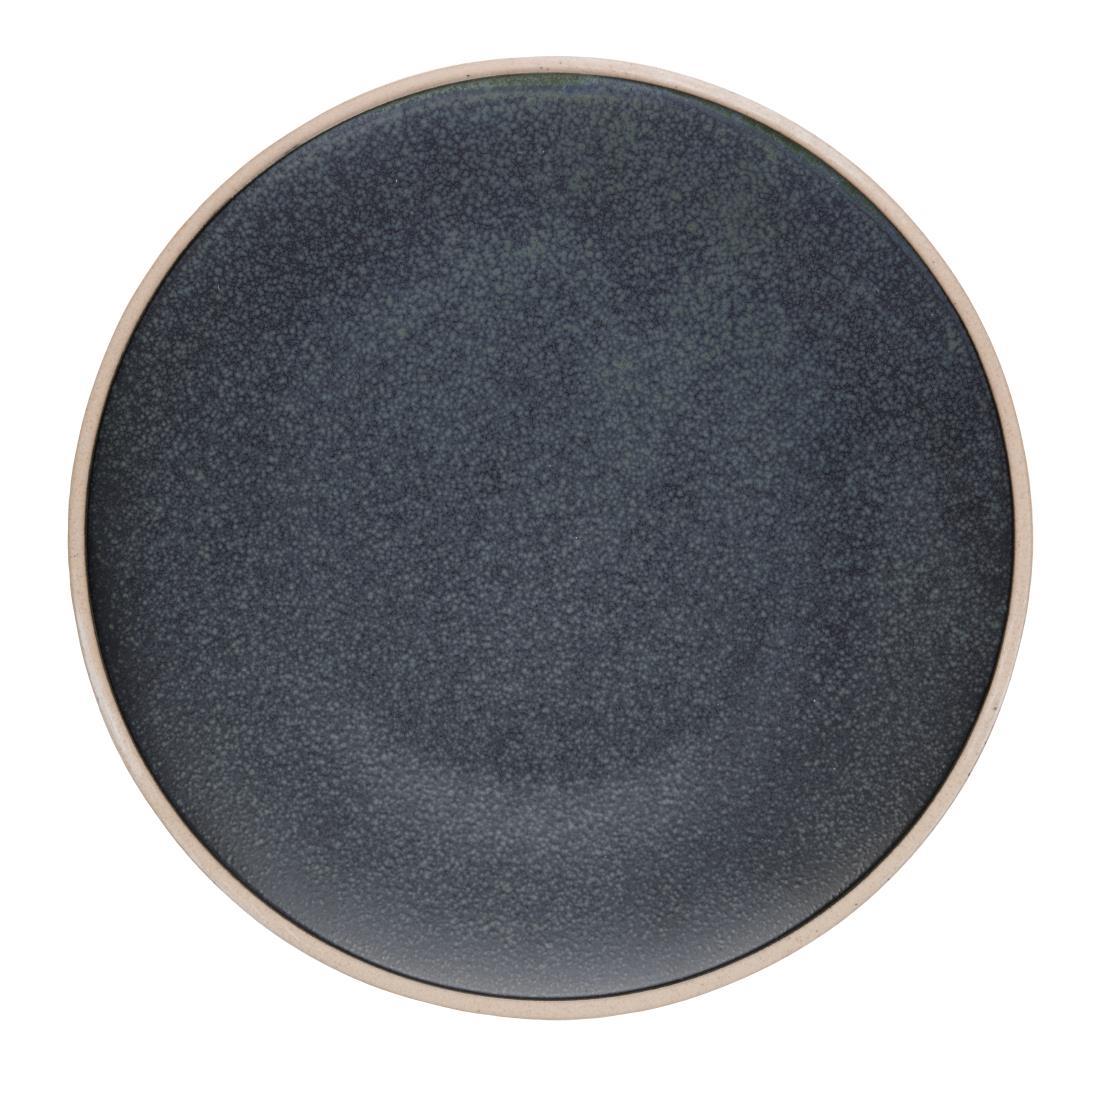 Stoneware Olympia Anello Plates in Black 285mm Raw Edge Pack of 4 